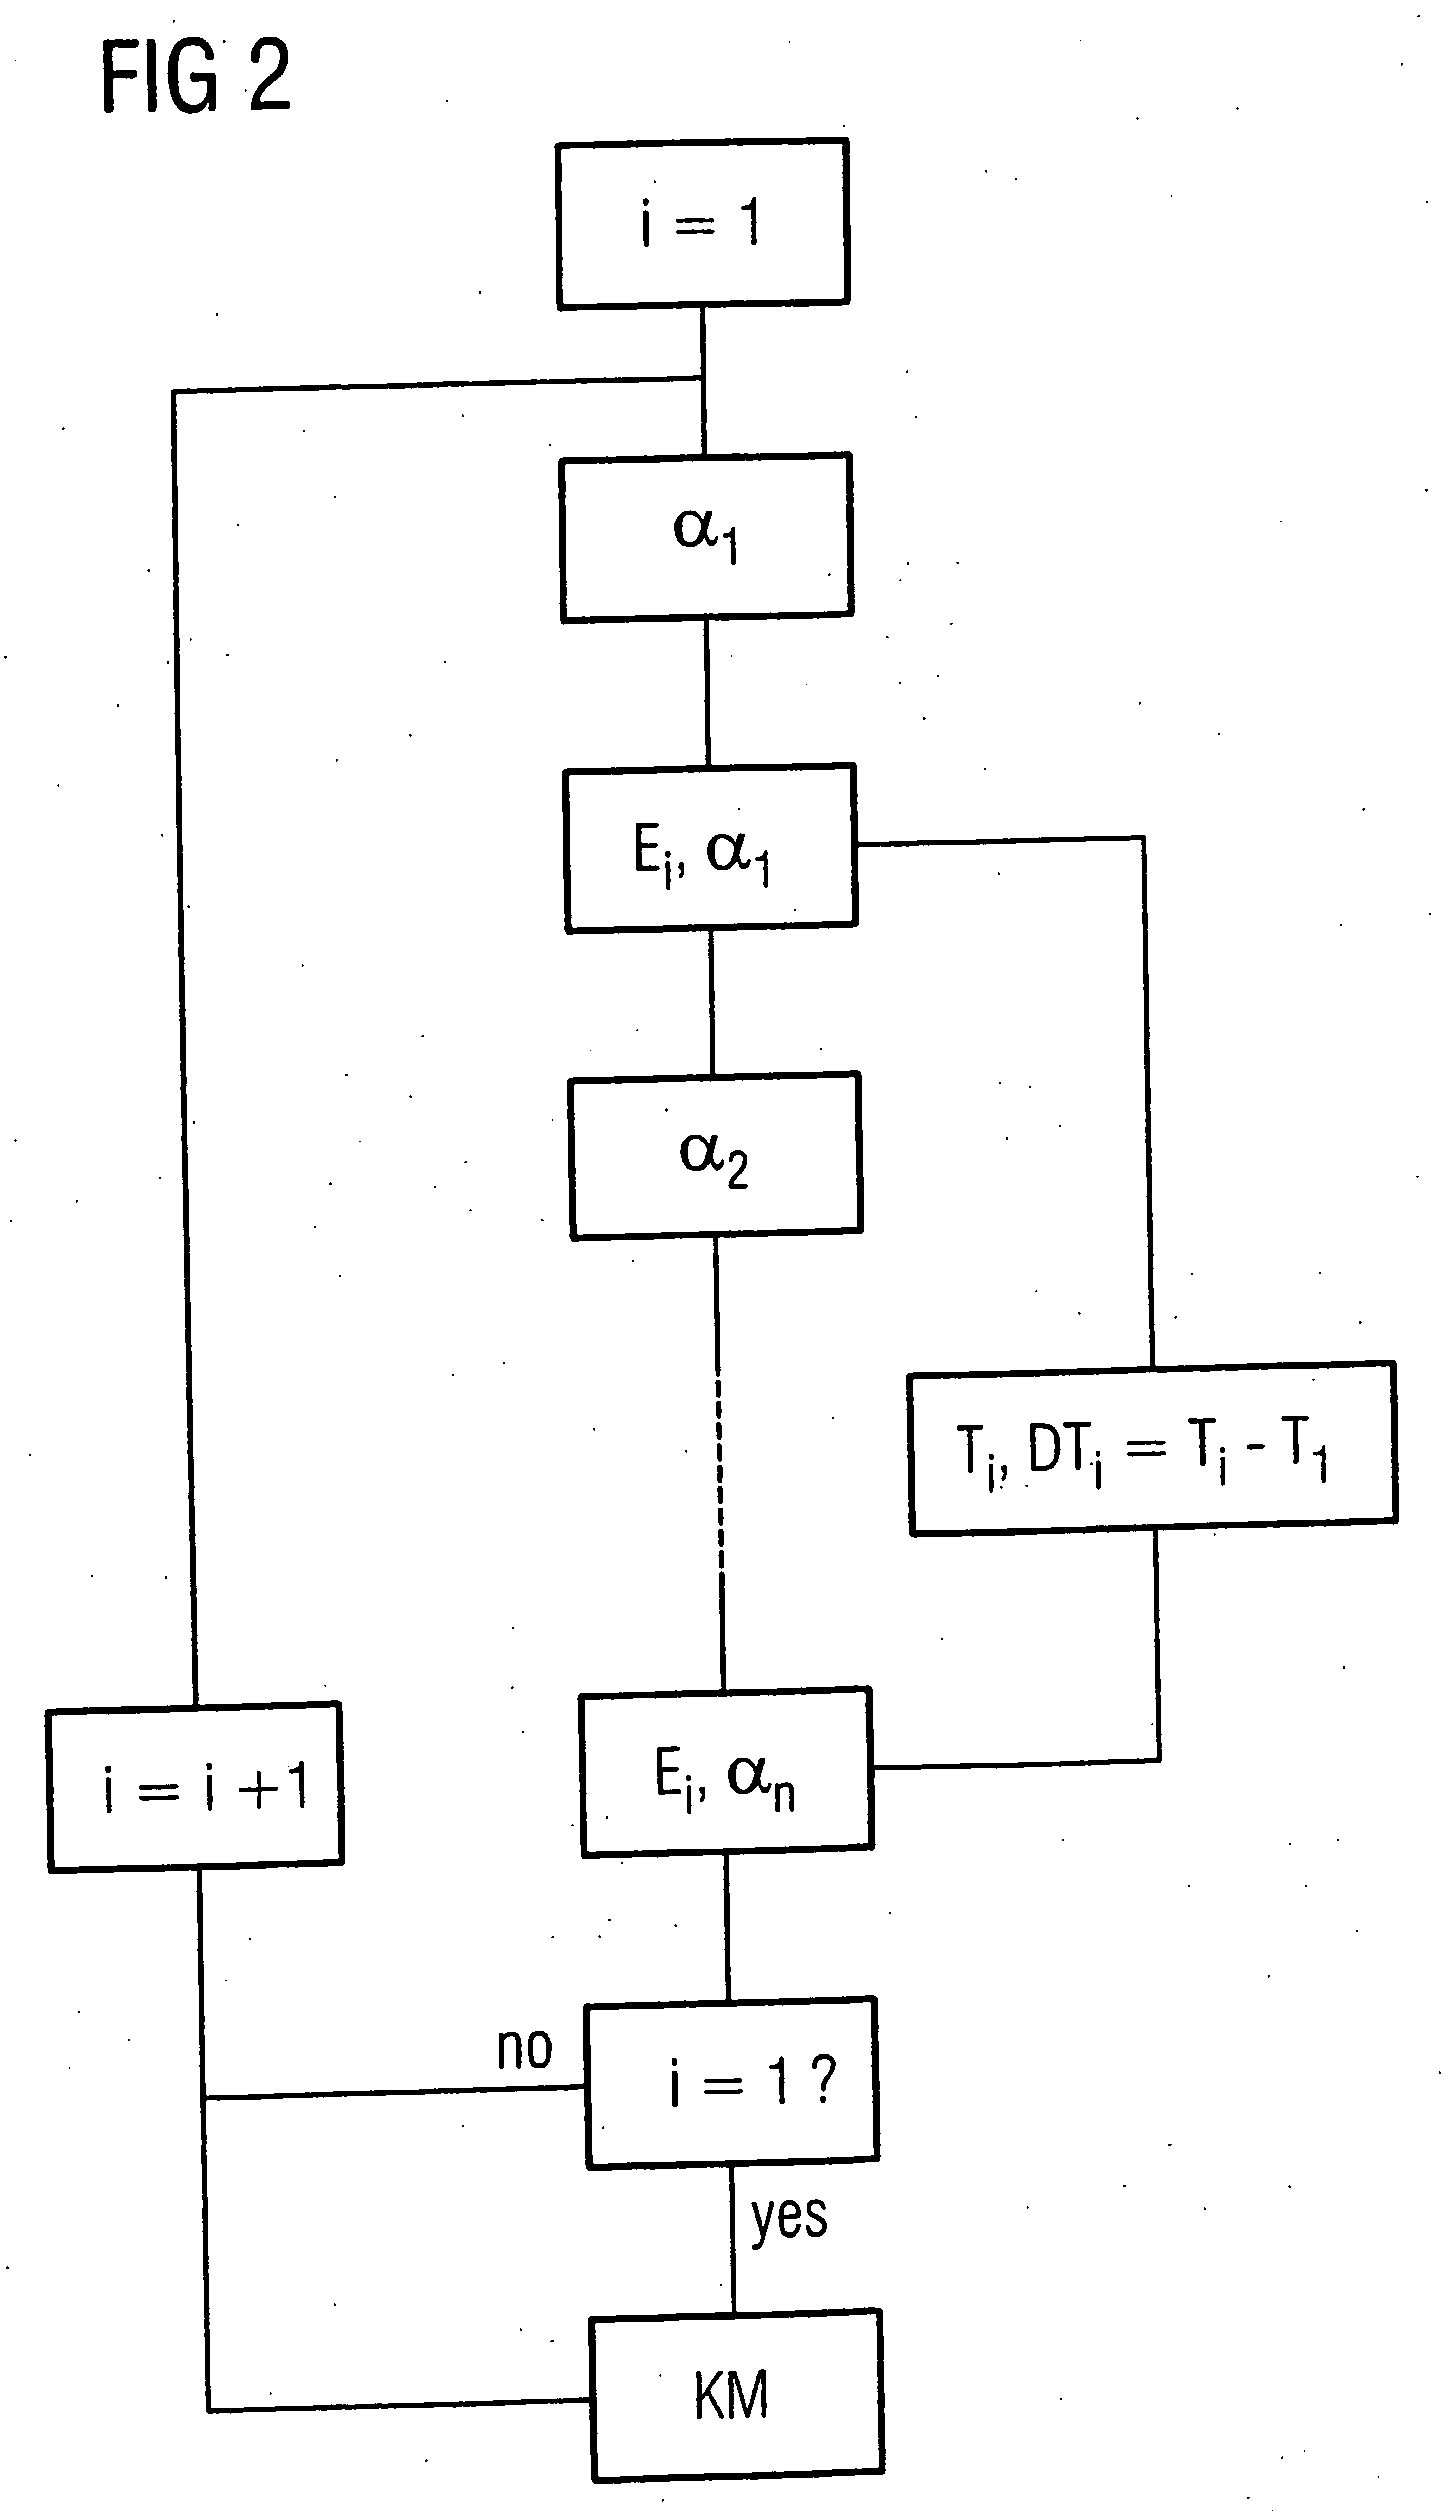 Mammography method and apparatus for forming a tomosynthetic 3-D X-ray image